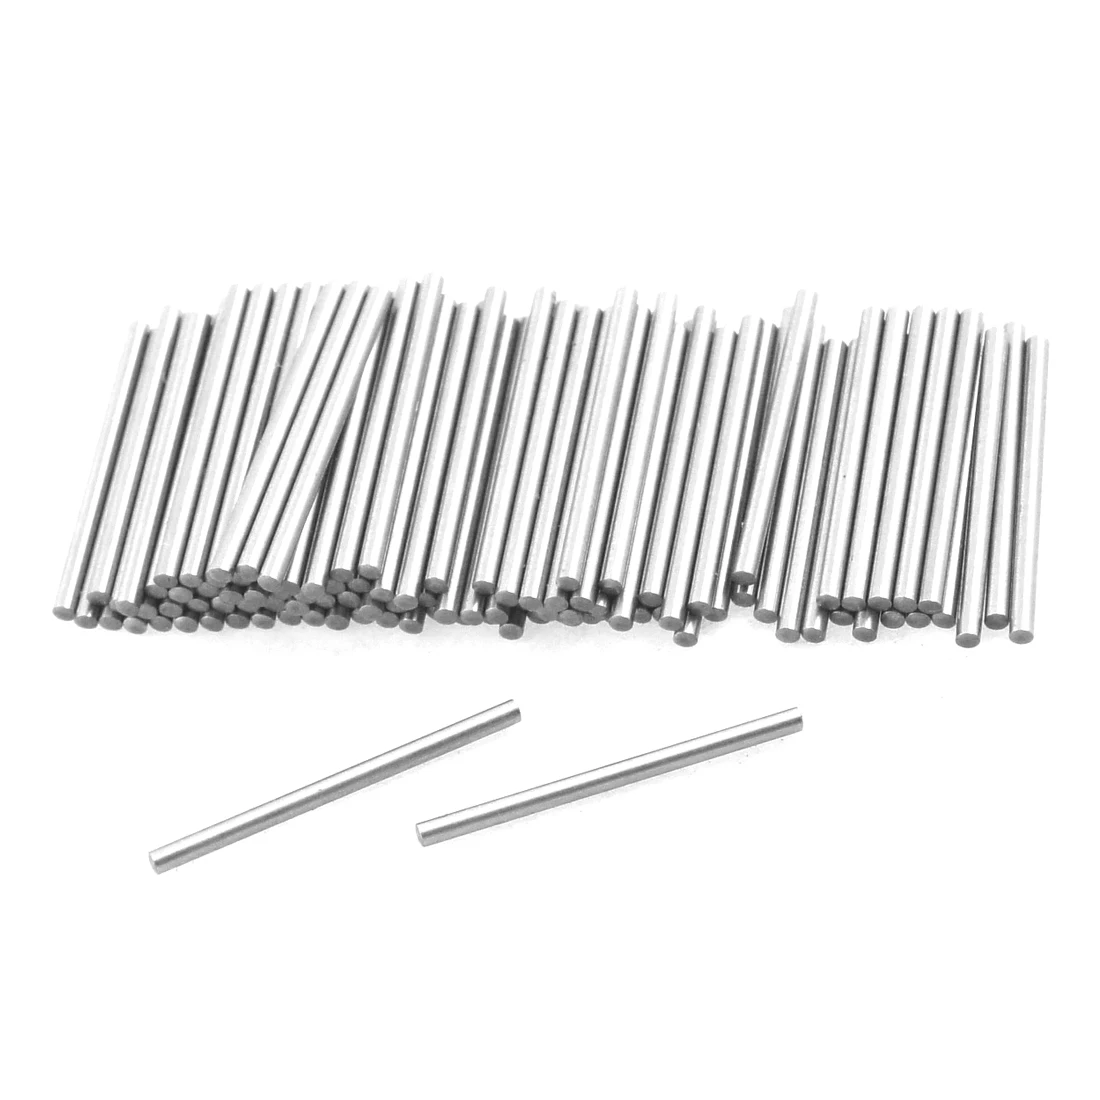 Image UXCELL 100 Pcs Stainless Steel 1Mm X 15.8Mm Dowel Pins Fasten Elements